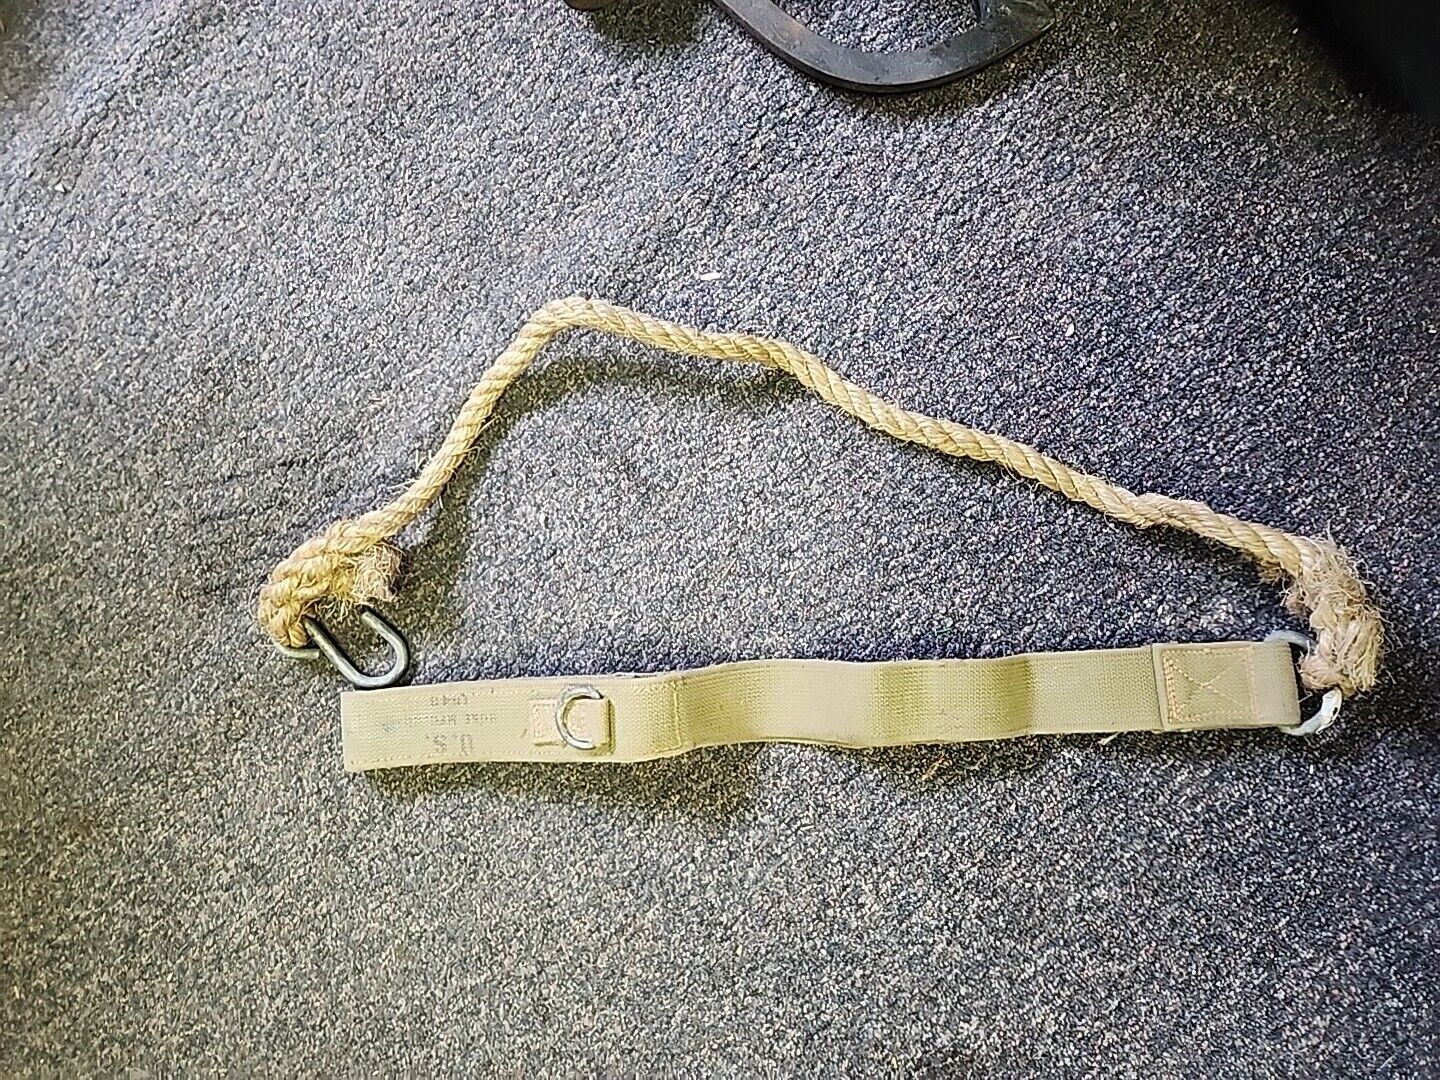 US WW2 M-1918 10th. Mountain Troop Airborne Drag Rope Tow Strap 1943 Dated